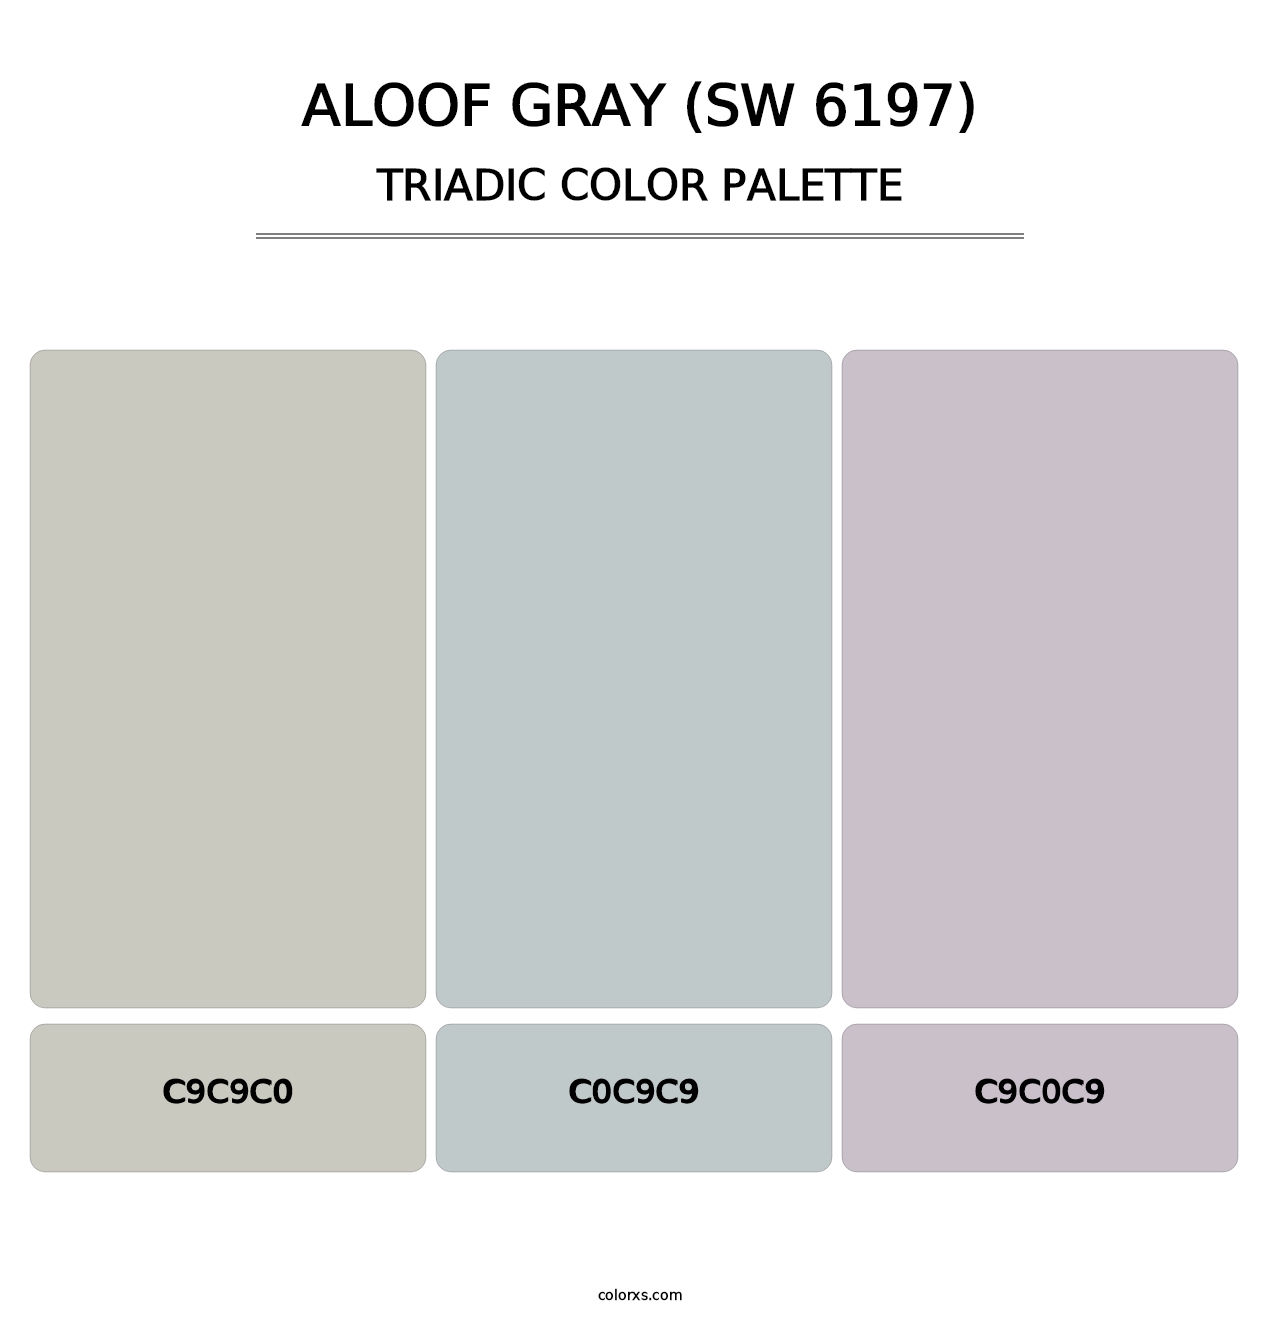 Aloof Gray (SW 6197) - Triadic Color Palette